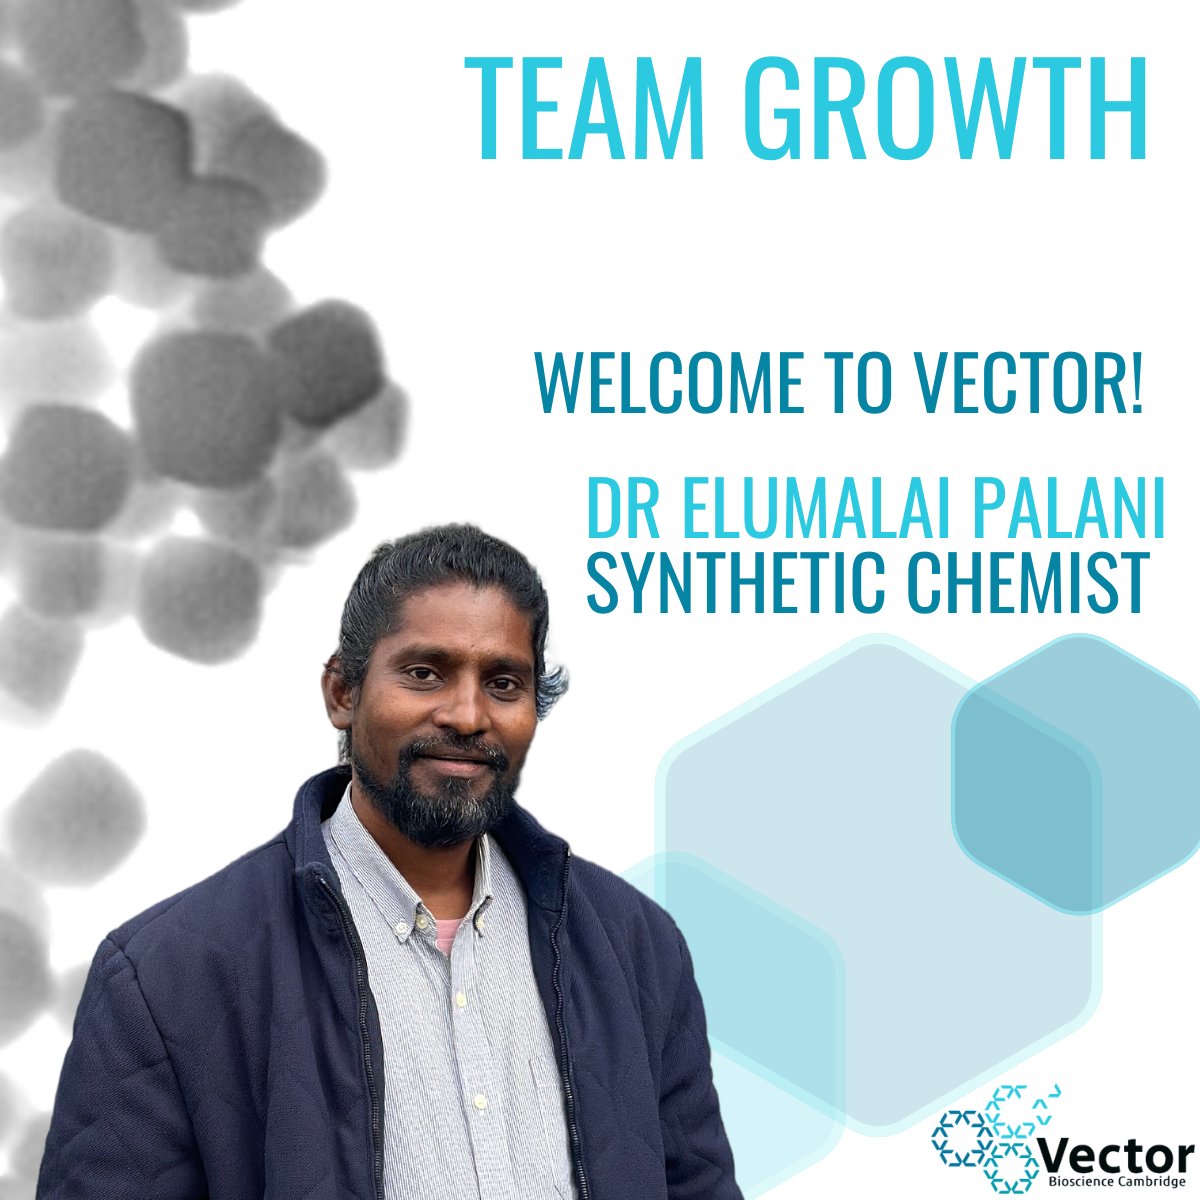 🌱We are growing! 
Welcome Dr Palani Elumalai, our newest #team member. We're eager to see the incredible contributions he will make in helping us revolutionize cancer treatment.

Welcome to the team, Elumalai!

#TeamGrowth #VectorTeam